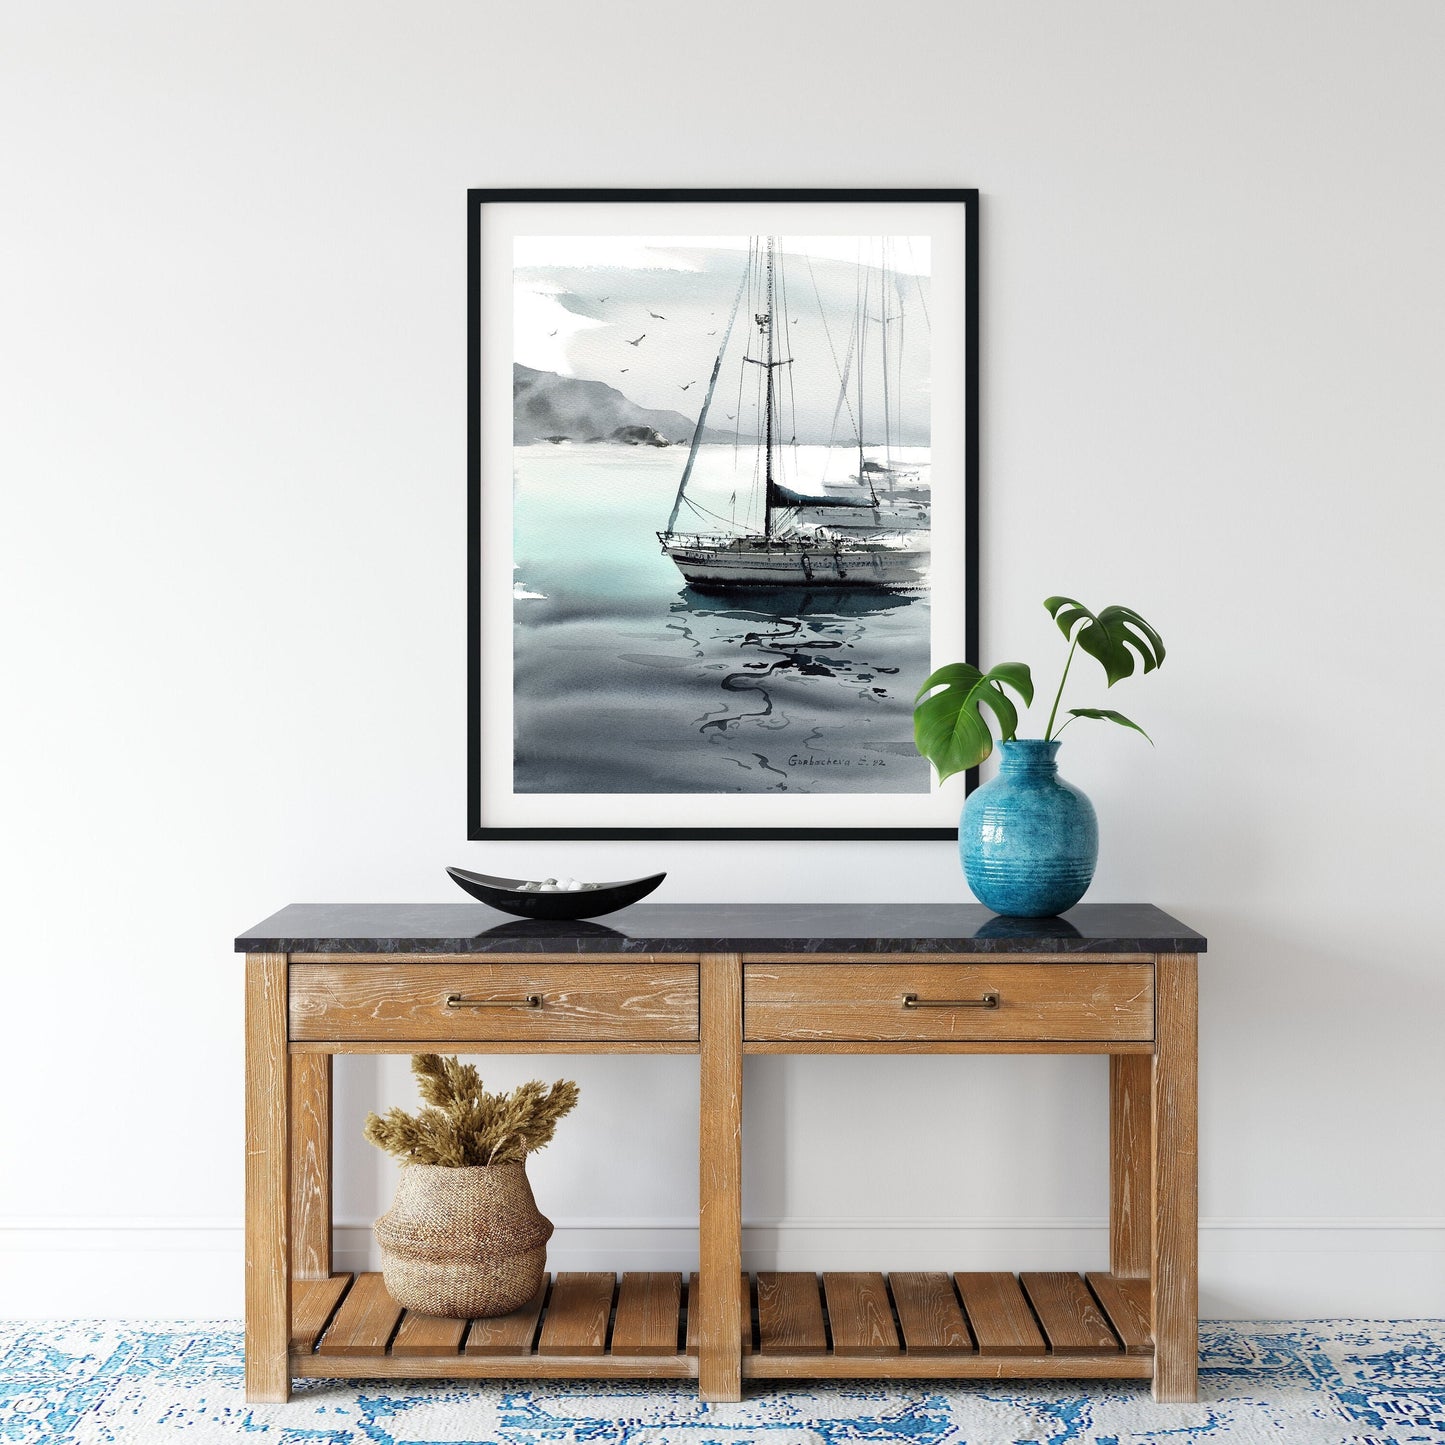 Monochrome Yacht Art, Seascape Print, Bedroom Wall Decor, Sailboat Watercolor Painting on Canvas, Home Wall Decor, Gift